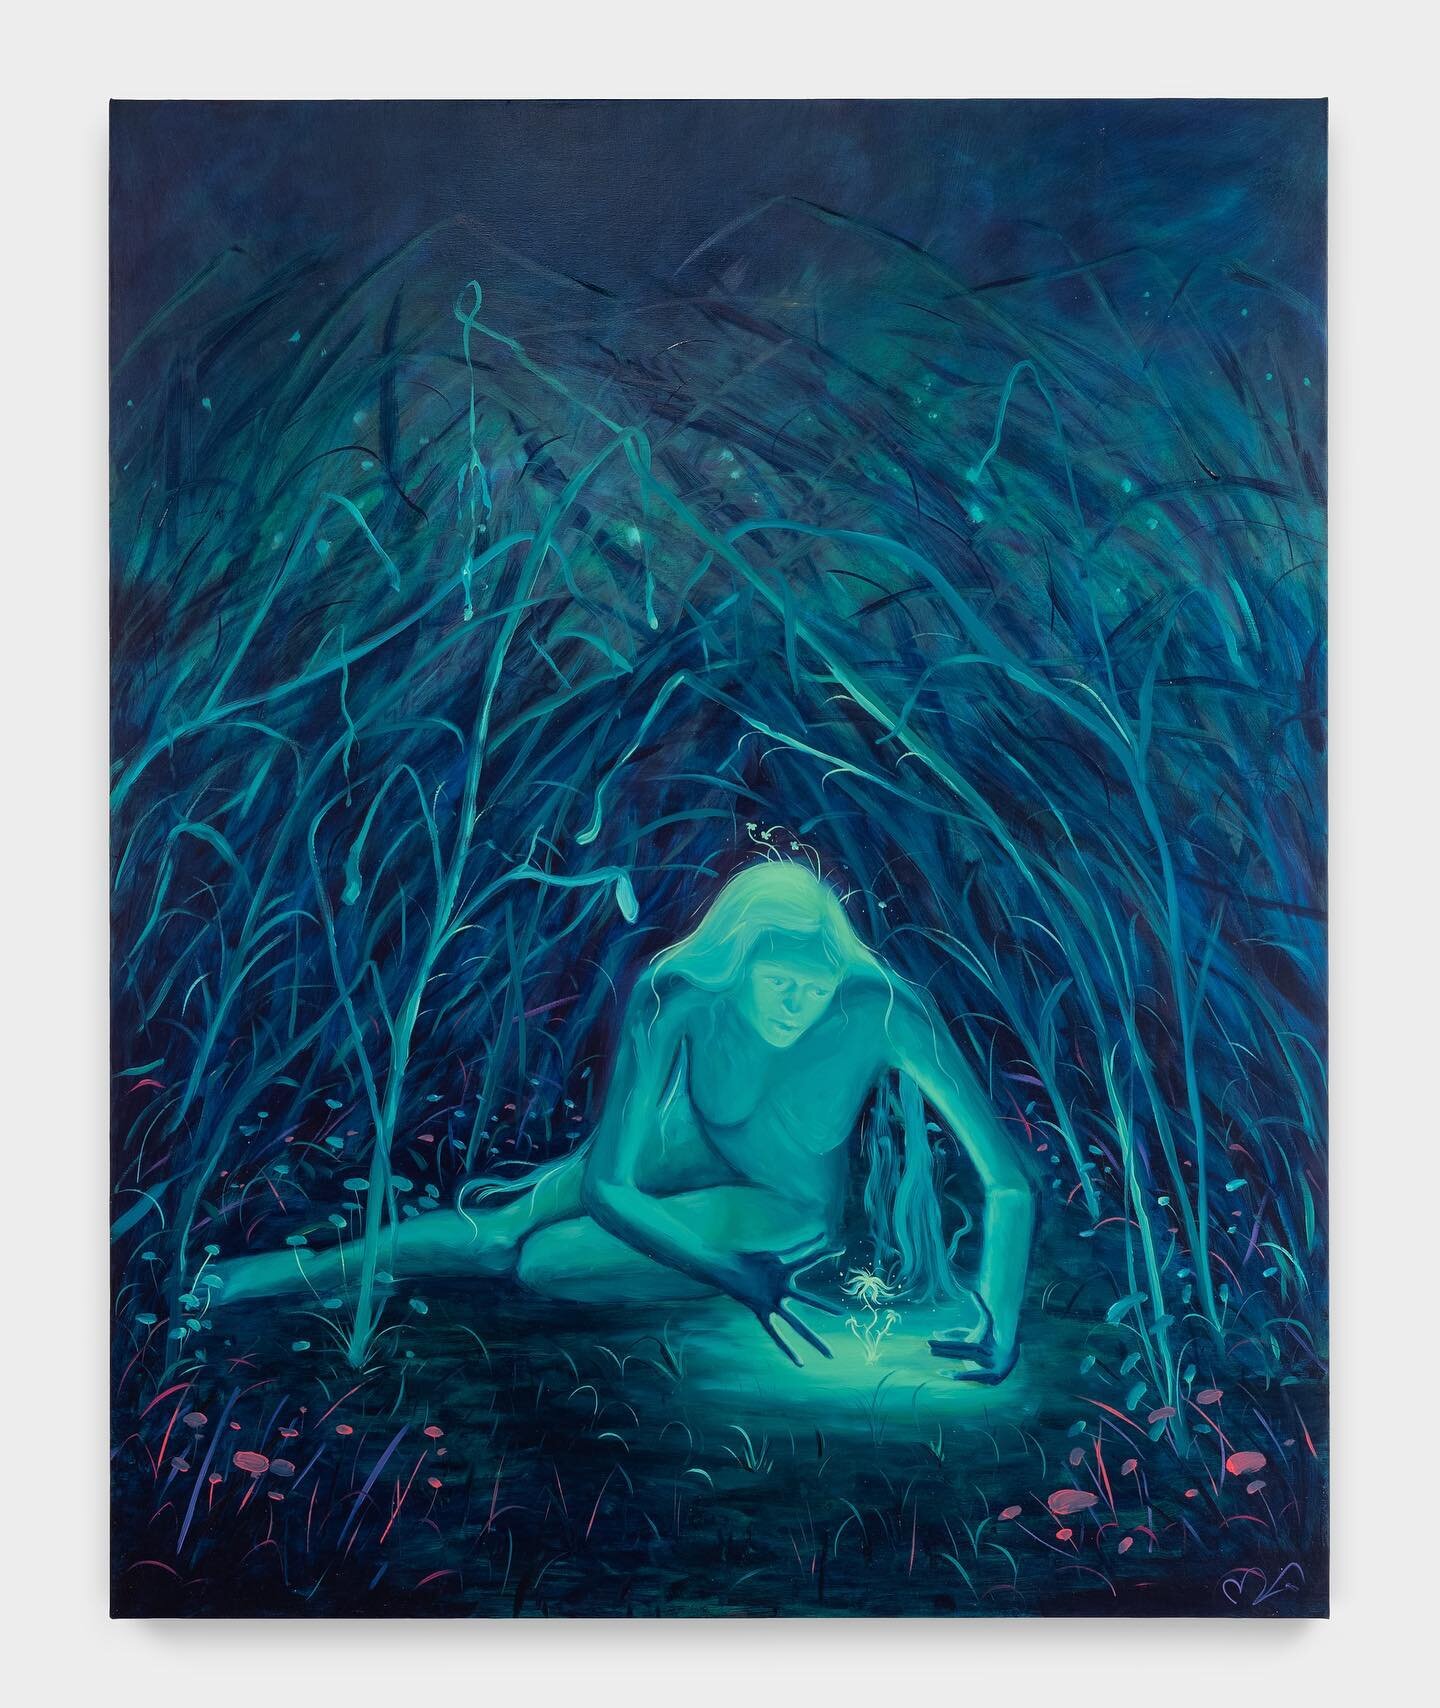 &ldquo;First Impression&rdquo; is opening tomorrow (Wednesday May 17th) from 6-8pm.

We are beyond excited to have this glowing painting by @maria.andrievskaya ! 

&ldquo;Filled with Spirit&rsquo;s Sacred Glow&rdquo;
Oil on linen
59x47 inches 
2023